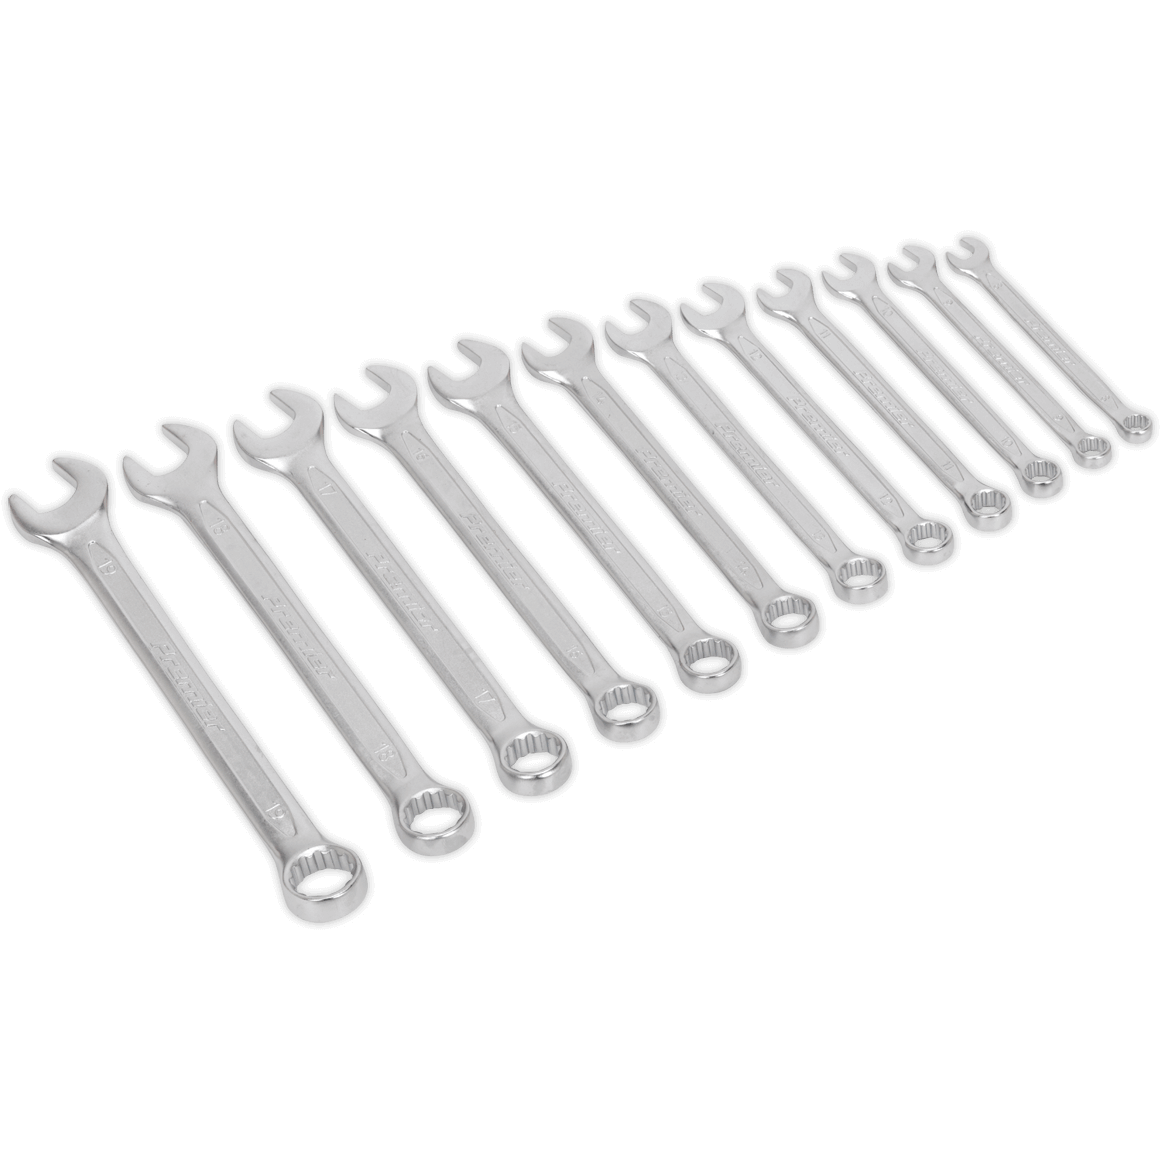 Photos - Tool Kit Sealey 12 Piece Cold Forged Combination Spanner Set Metric AK6325 